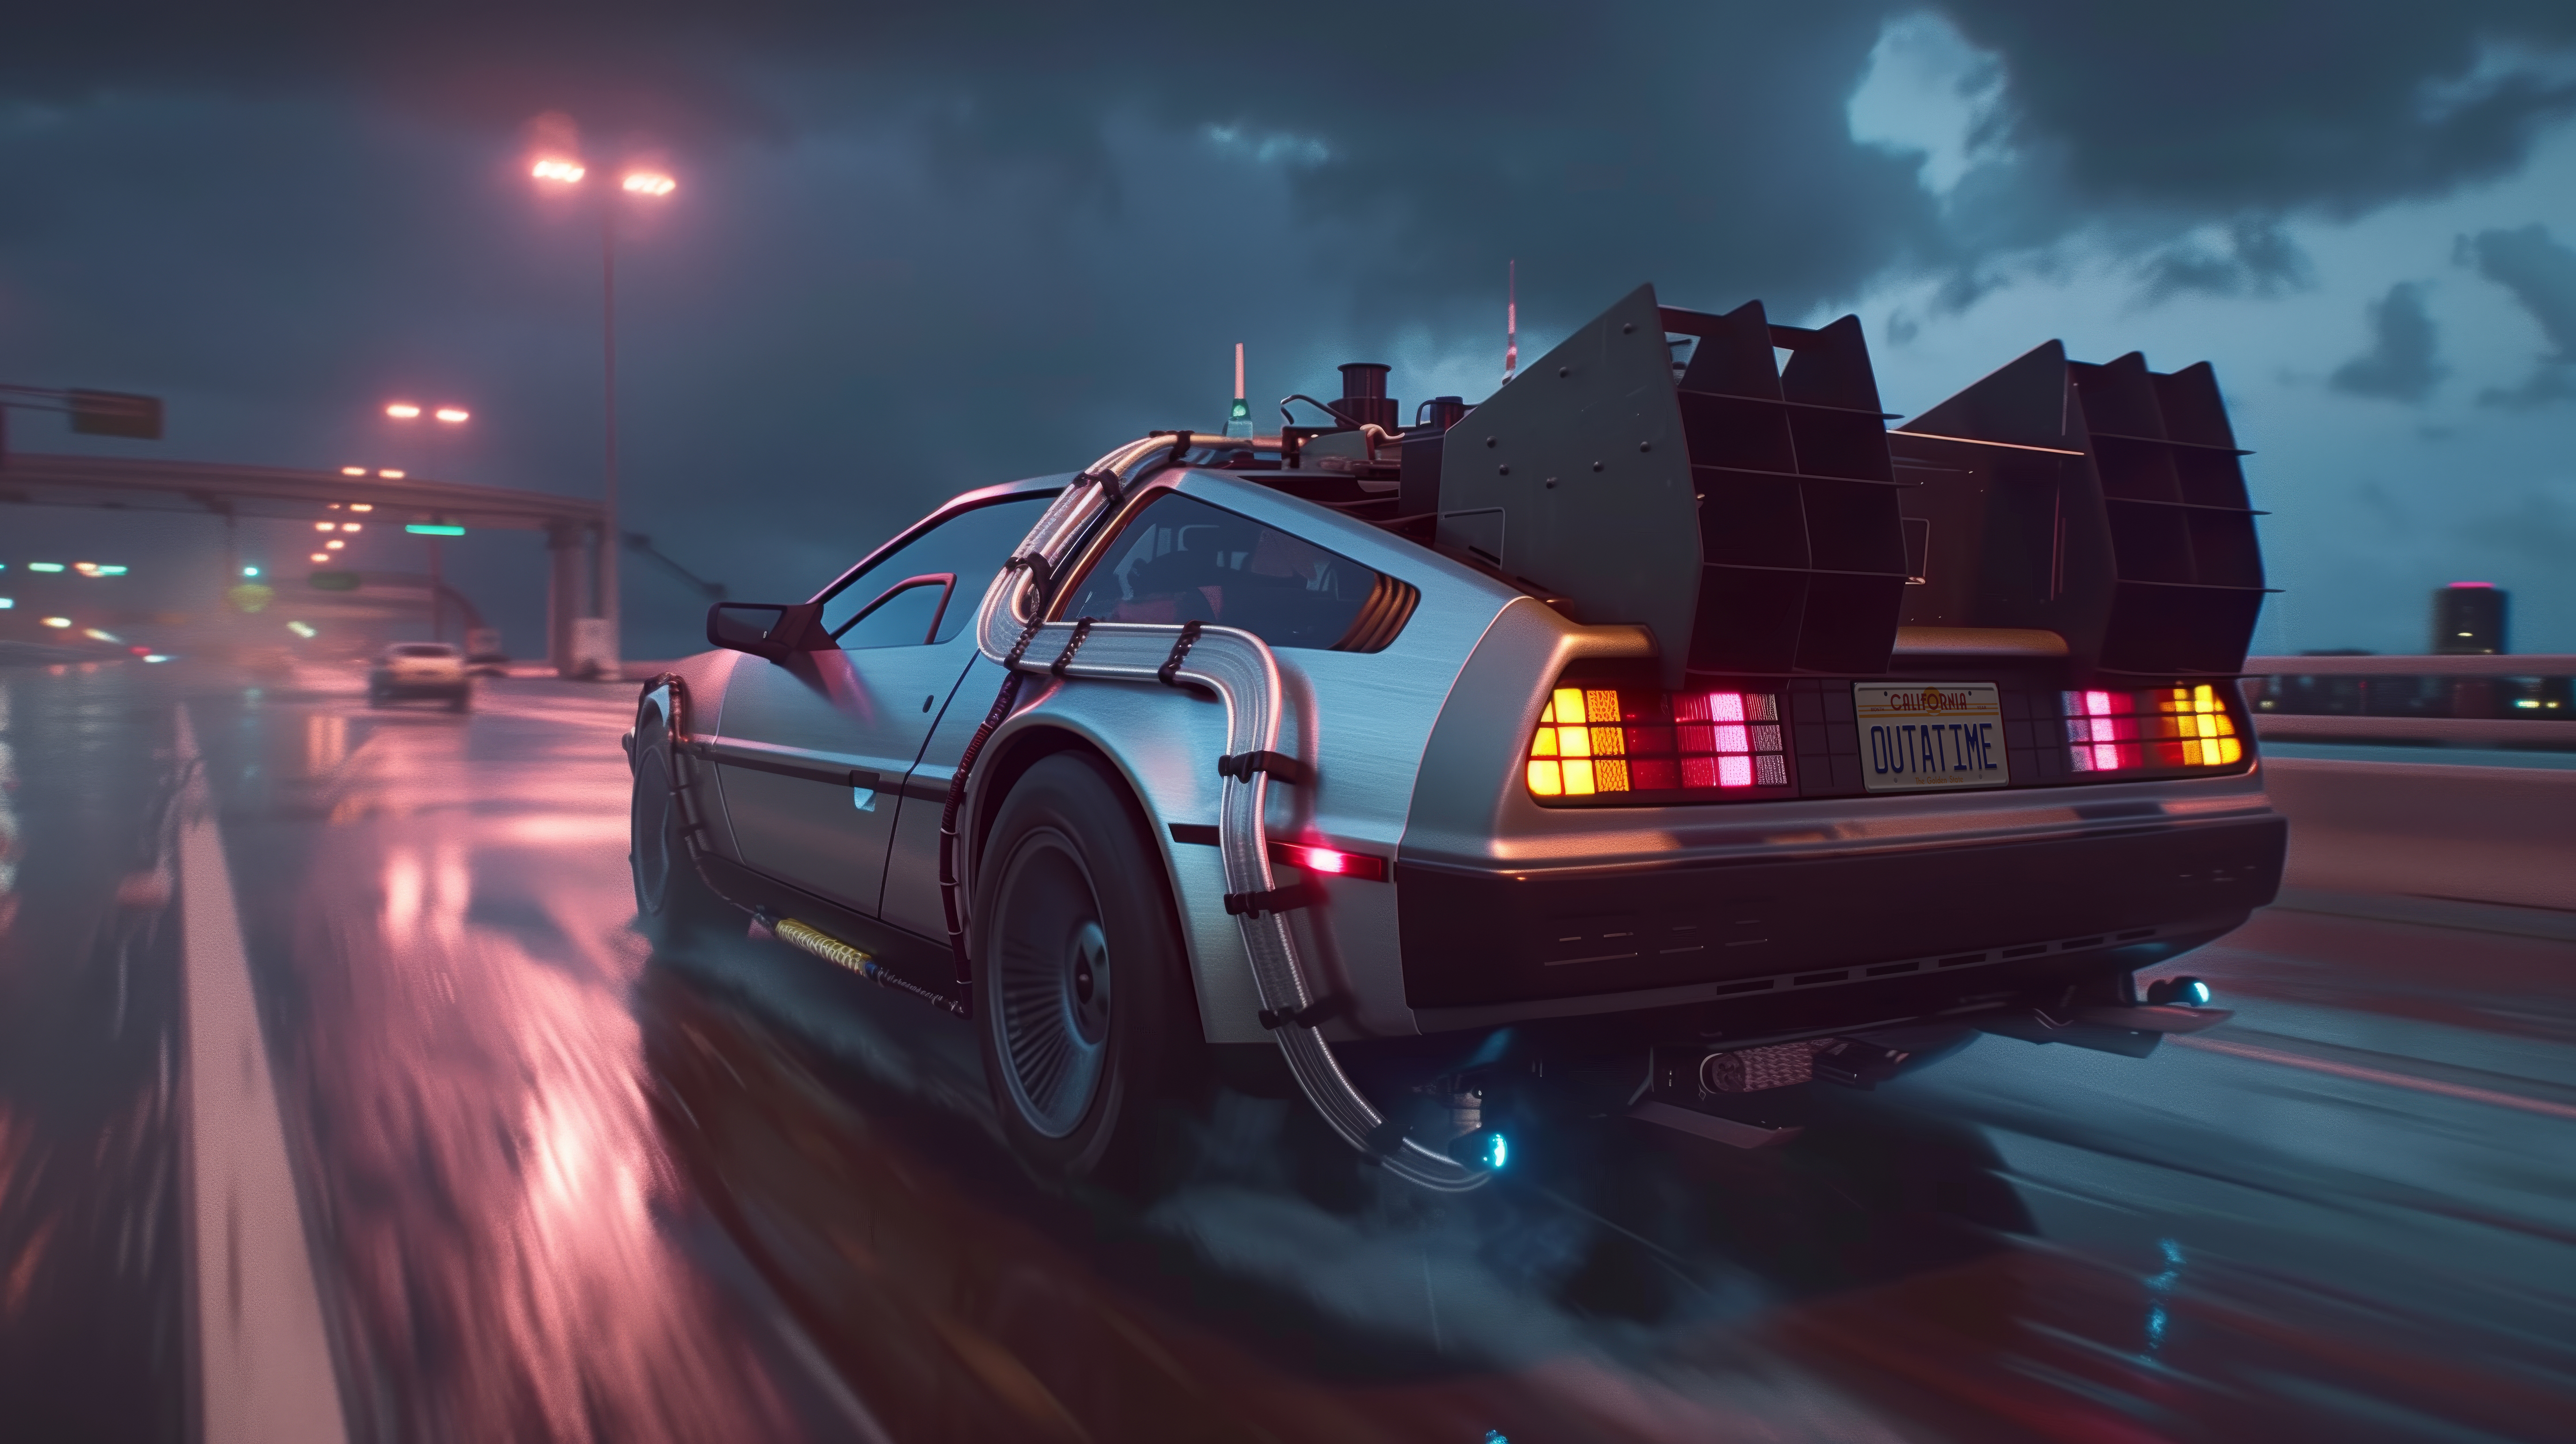 General 5824x3264 car AI art DeLorean Time Machine driving taillights highway night